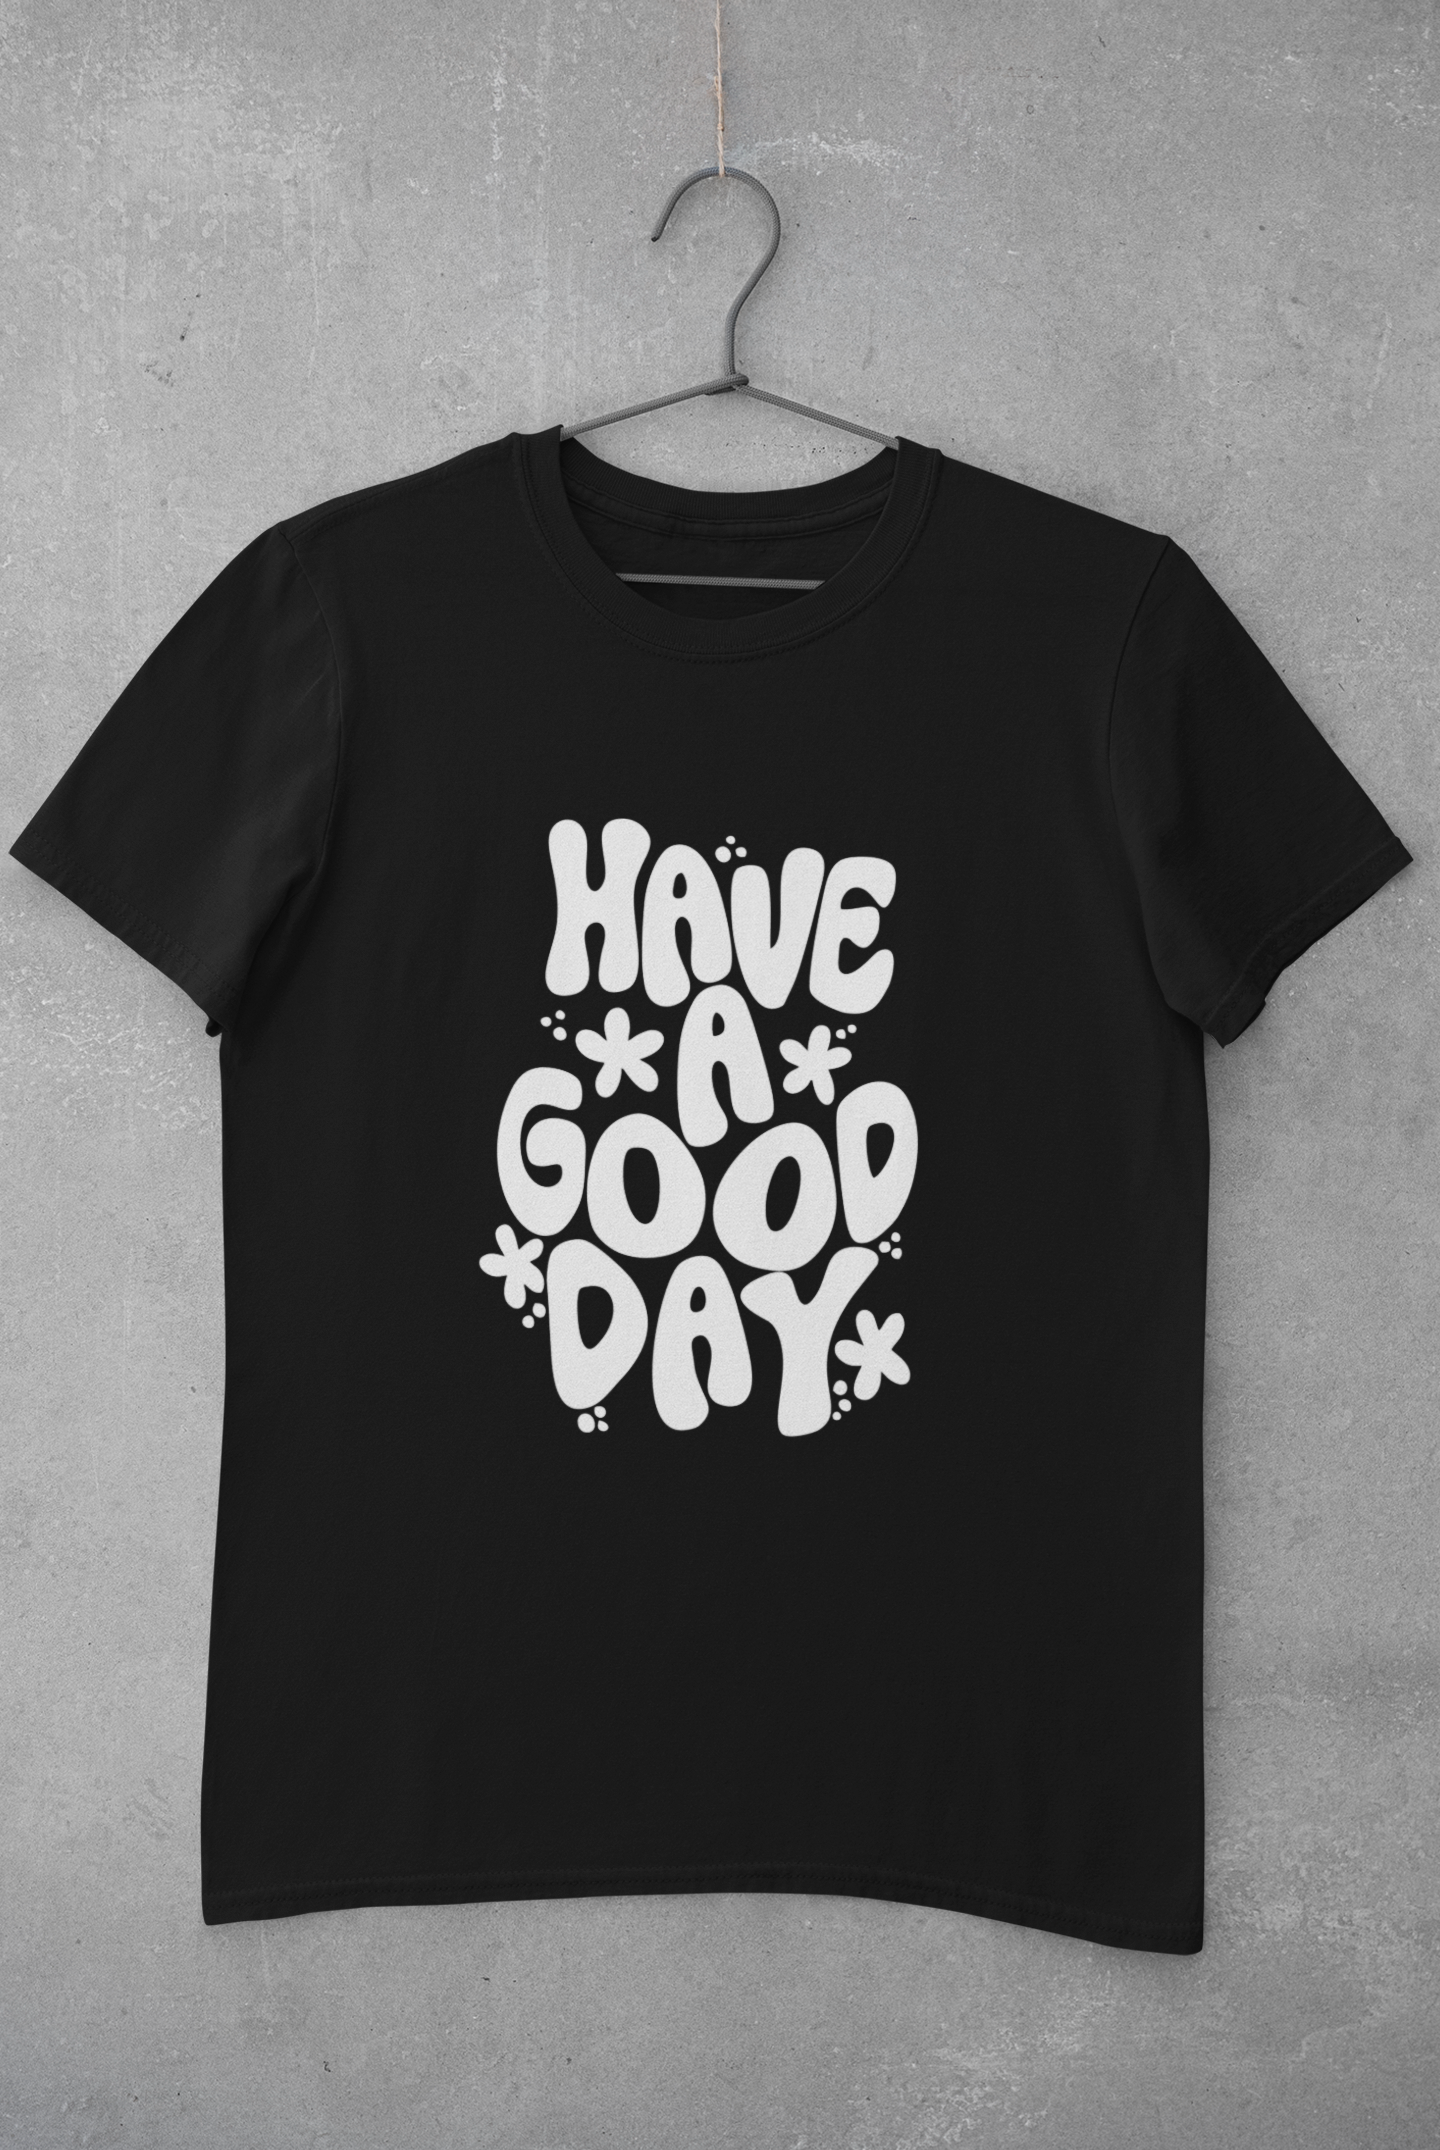 HAVE A GOOD DAY T-SHIRT